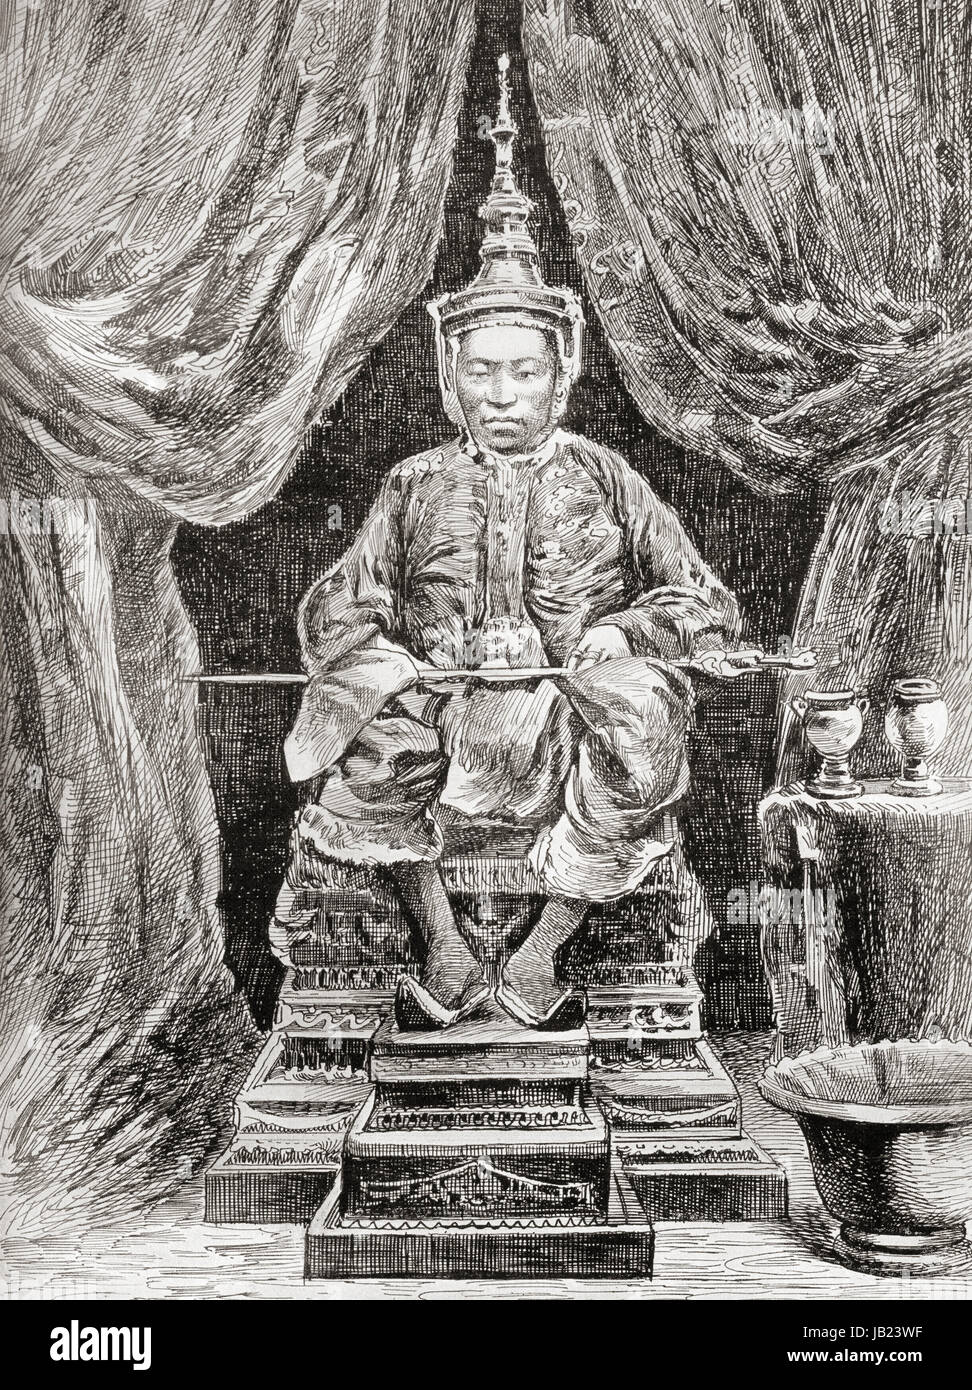 Norodom, known previously as Ang Voddey,  1834 – 1904.  King of Cambodia from 1860 to 1904.  From Hutchinson's History of the Nations, published 1915. Stock Photo